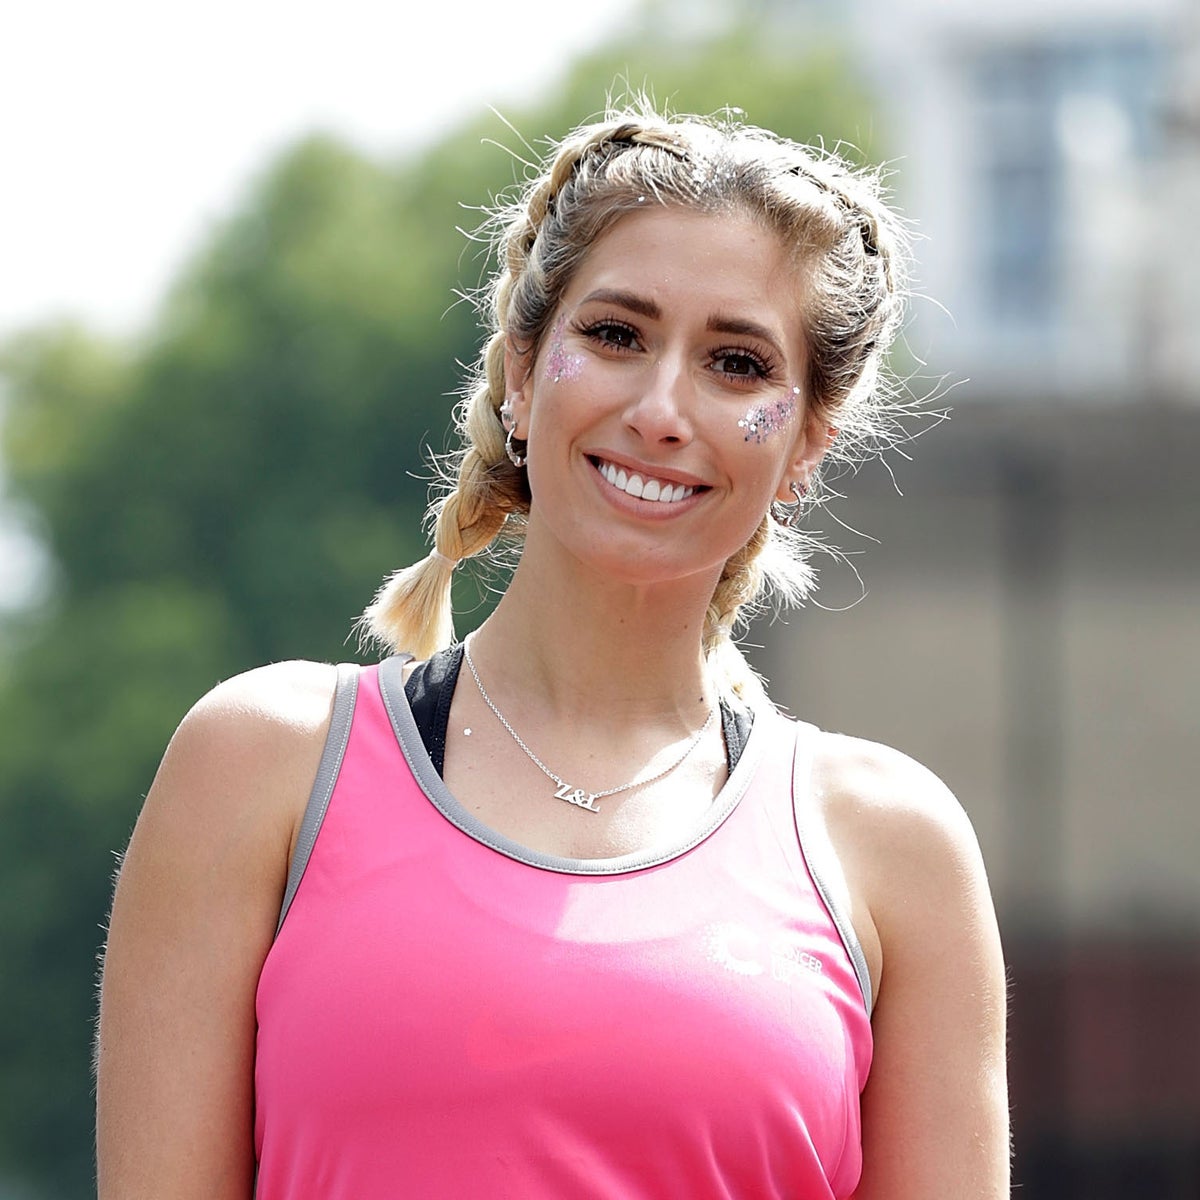 Stacey Solomon says she wants to celebrate her 'muffin top, saggy